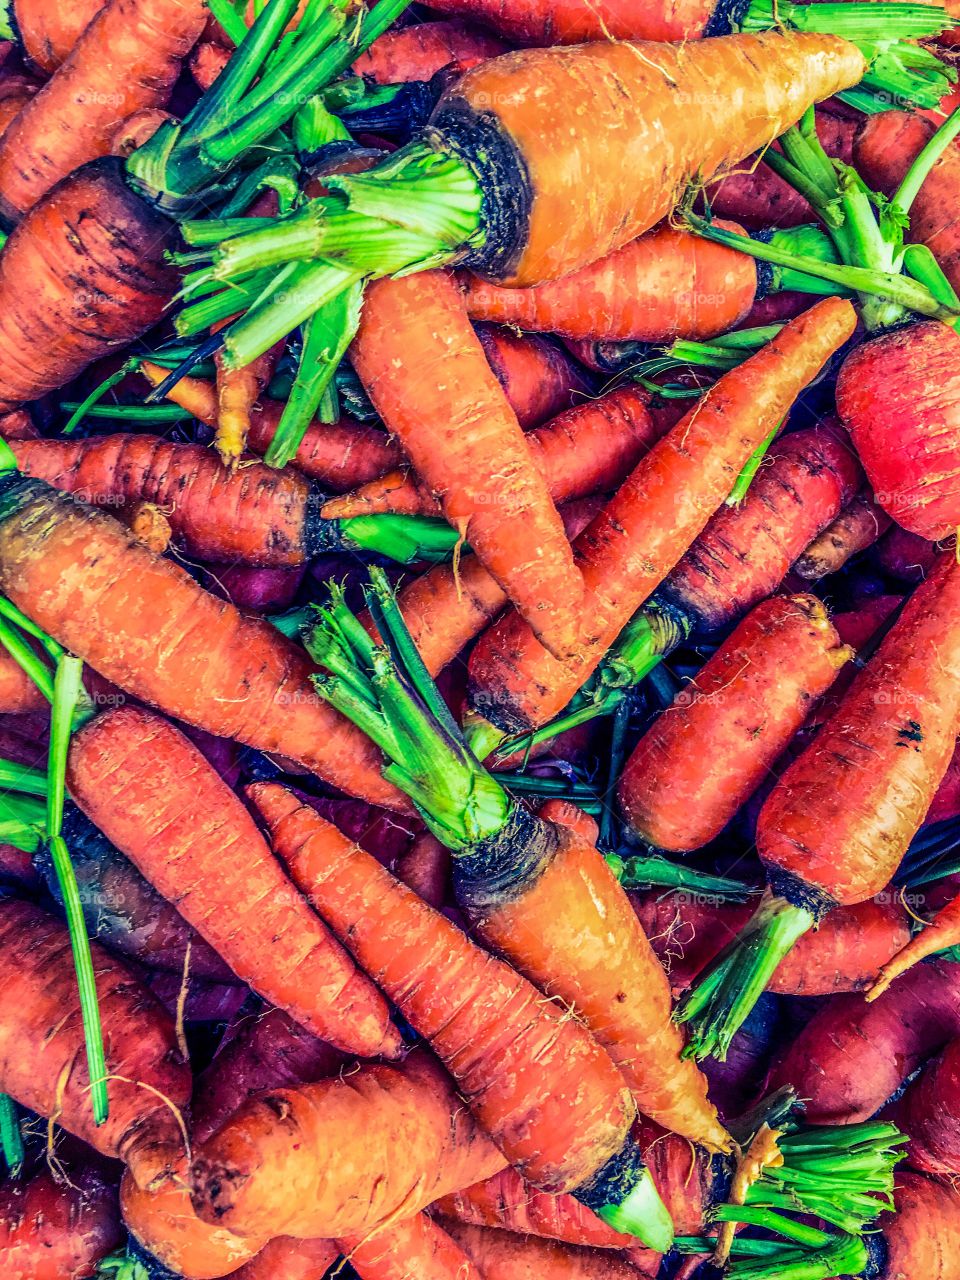 Fresh carrots from the market 